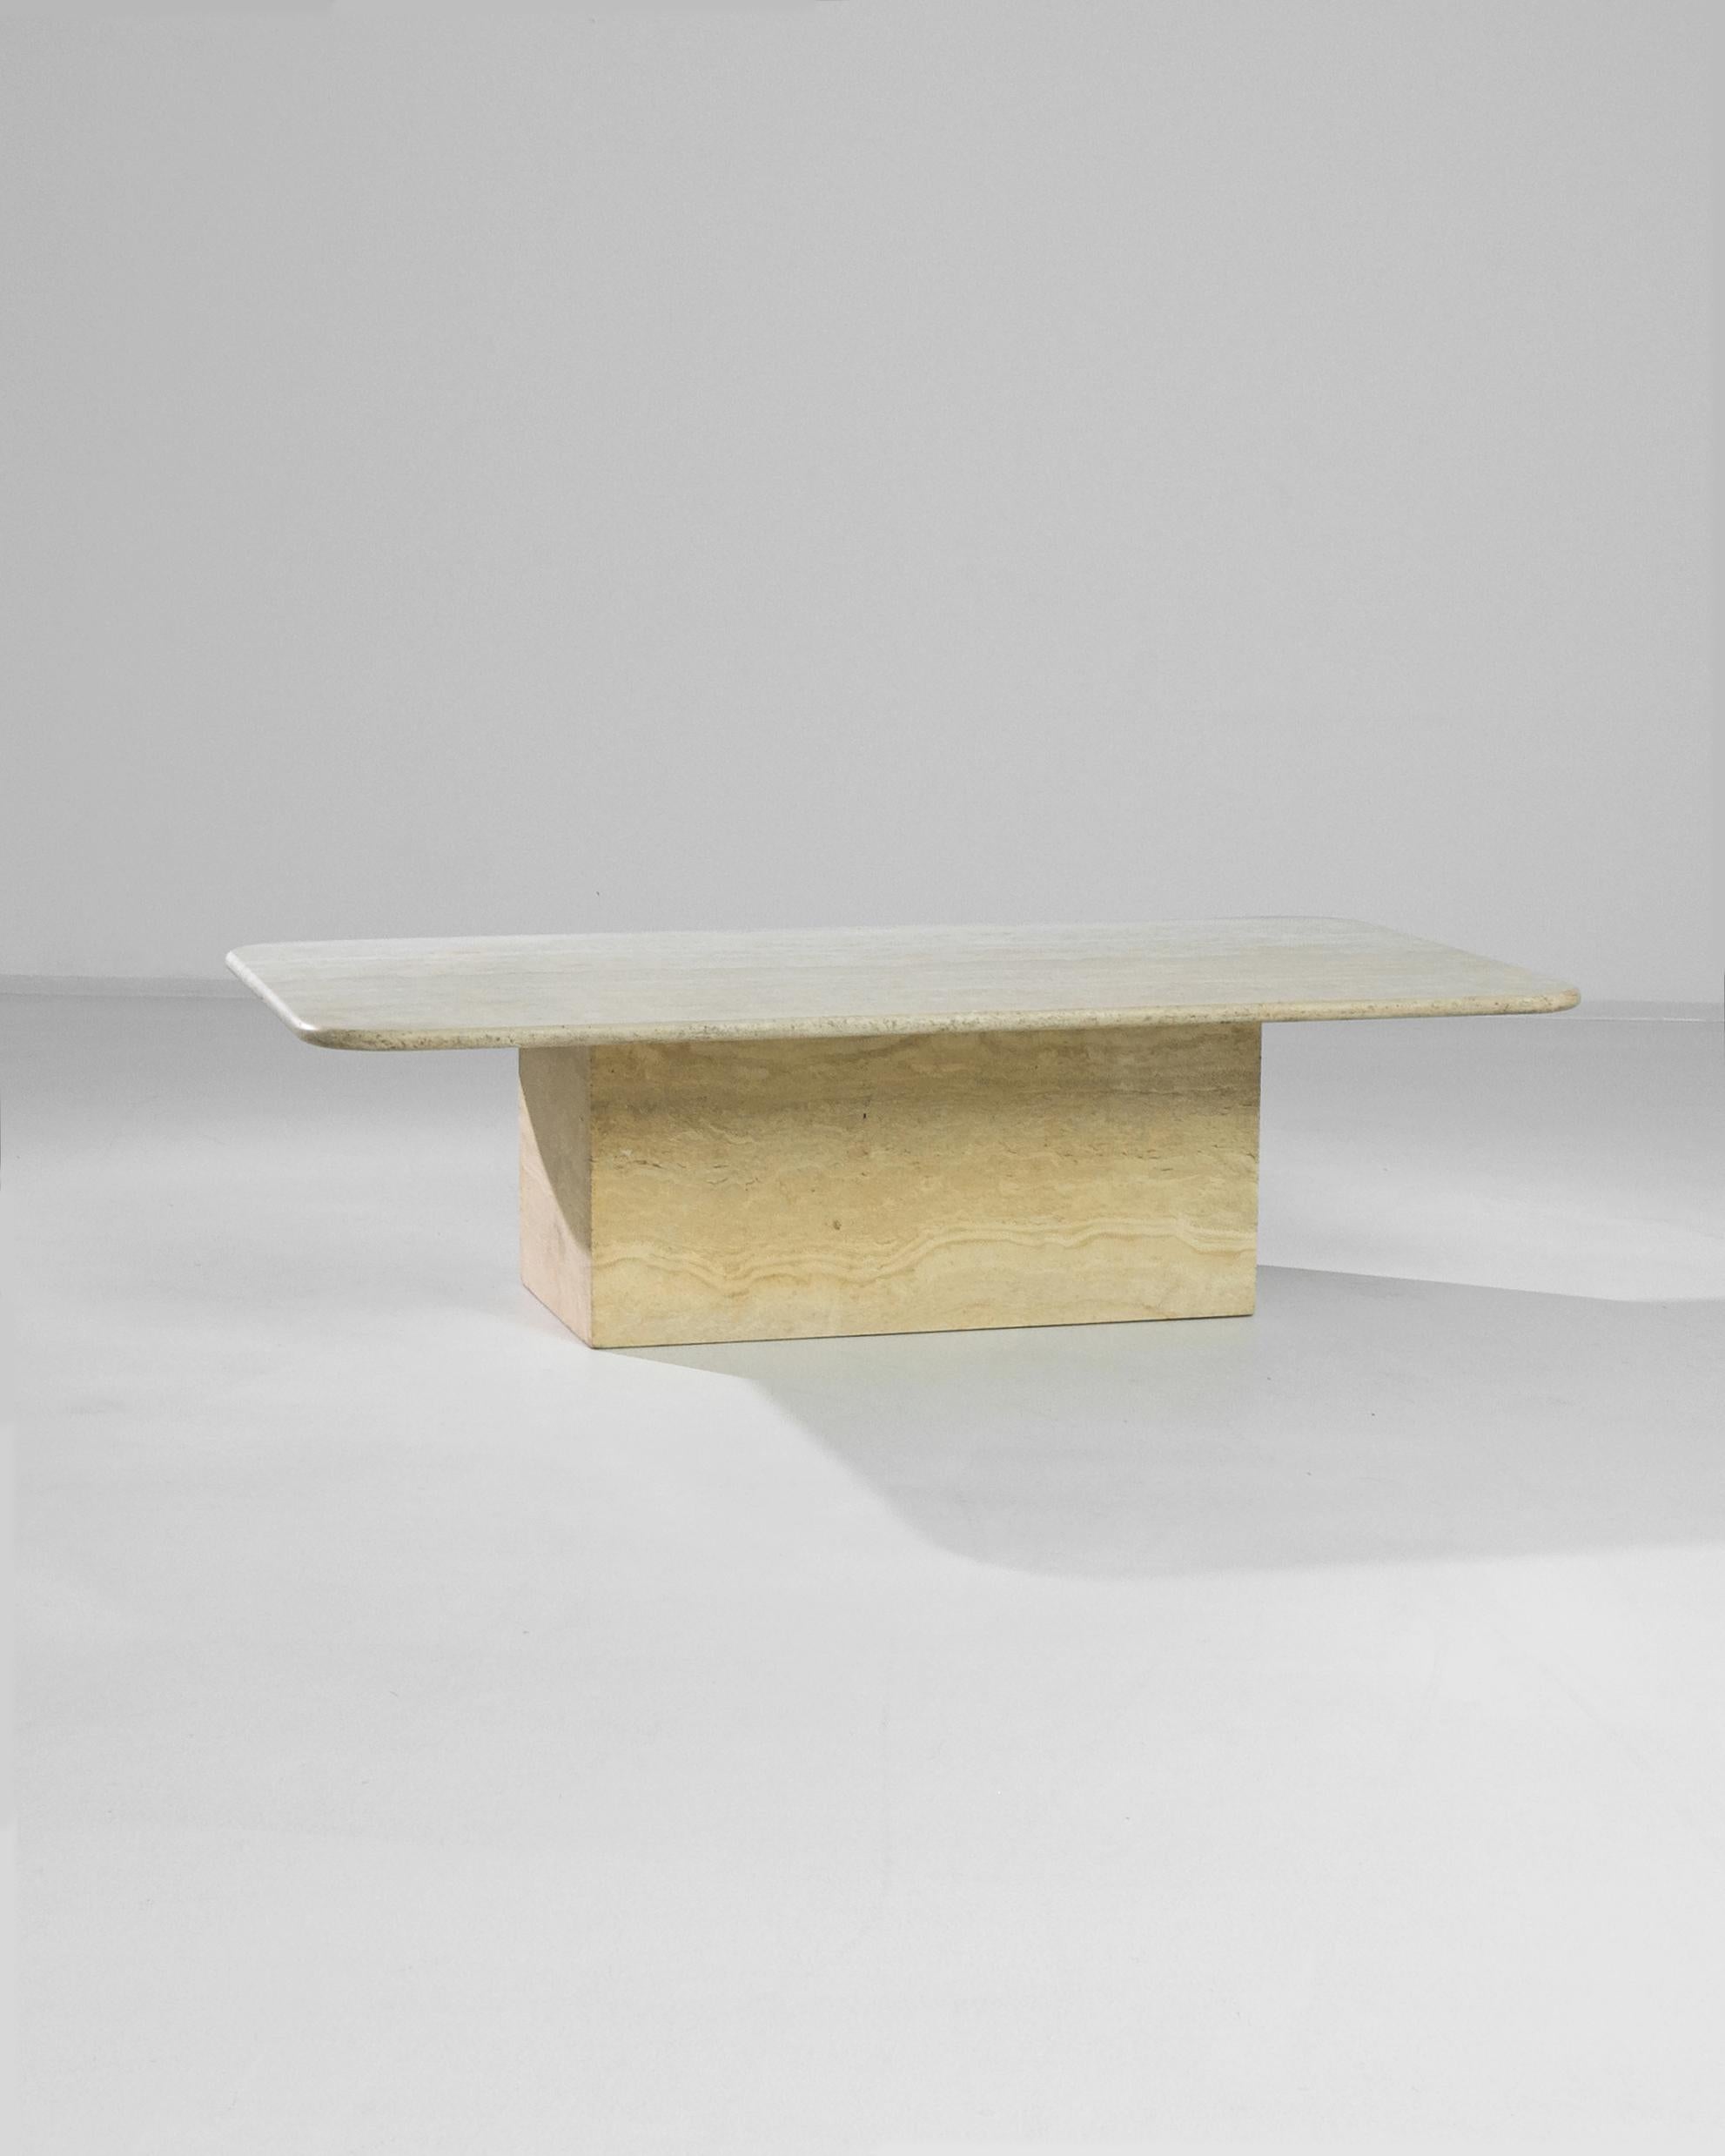 The formal simplicity and beautiful color of this travertine marble coffee table create an impression of minimalist luxury. Made in Italy in the 1970s, an oblong tabletop with gently rounded corners sits atop a low rectangle of stone. The butter